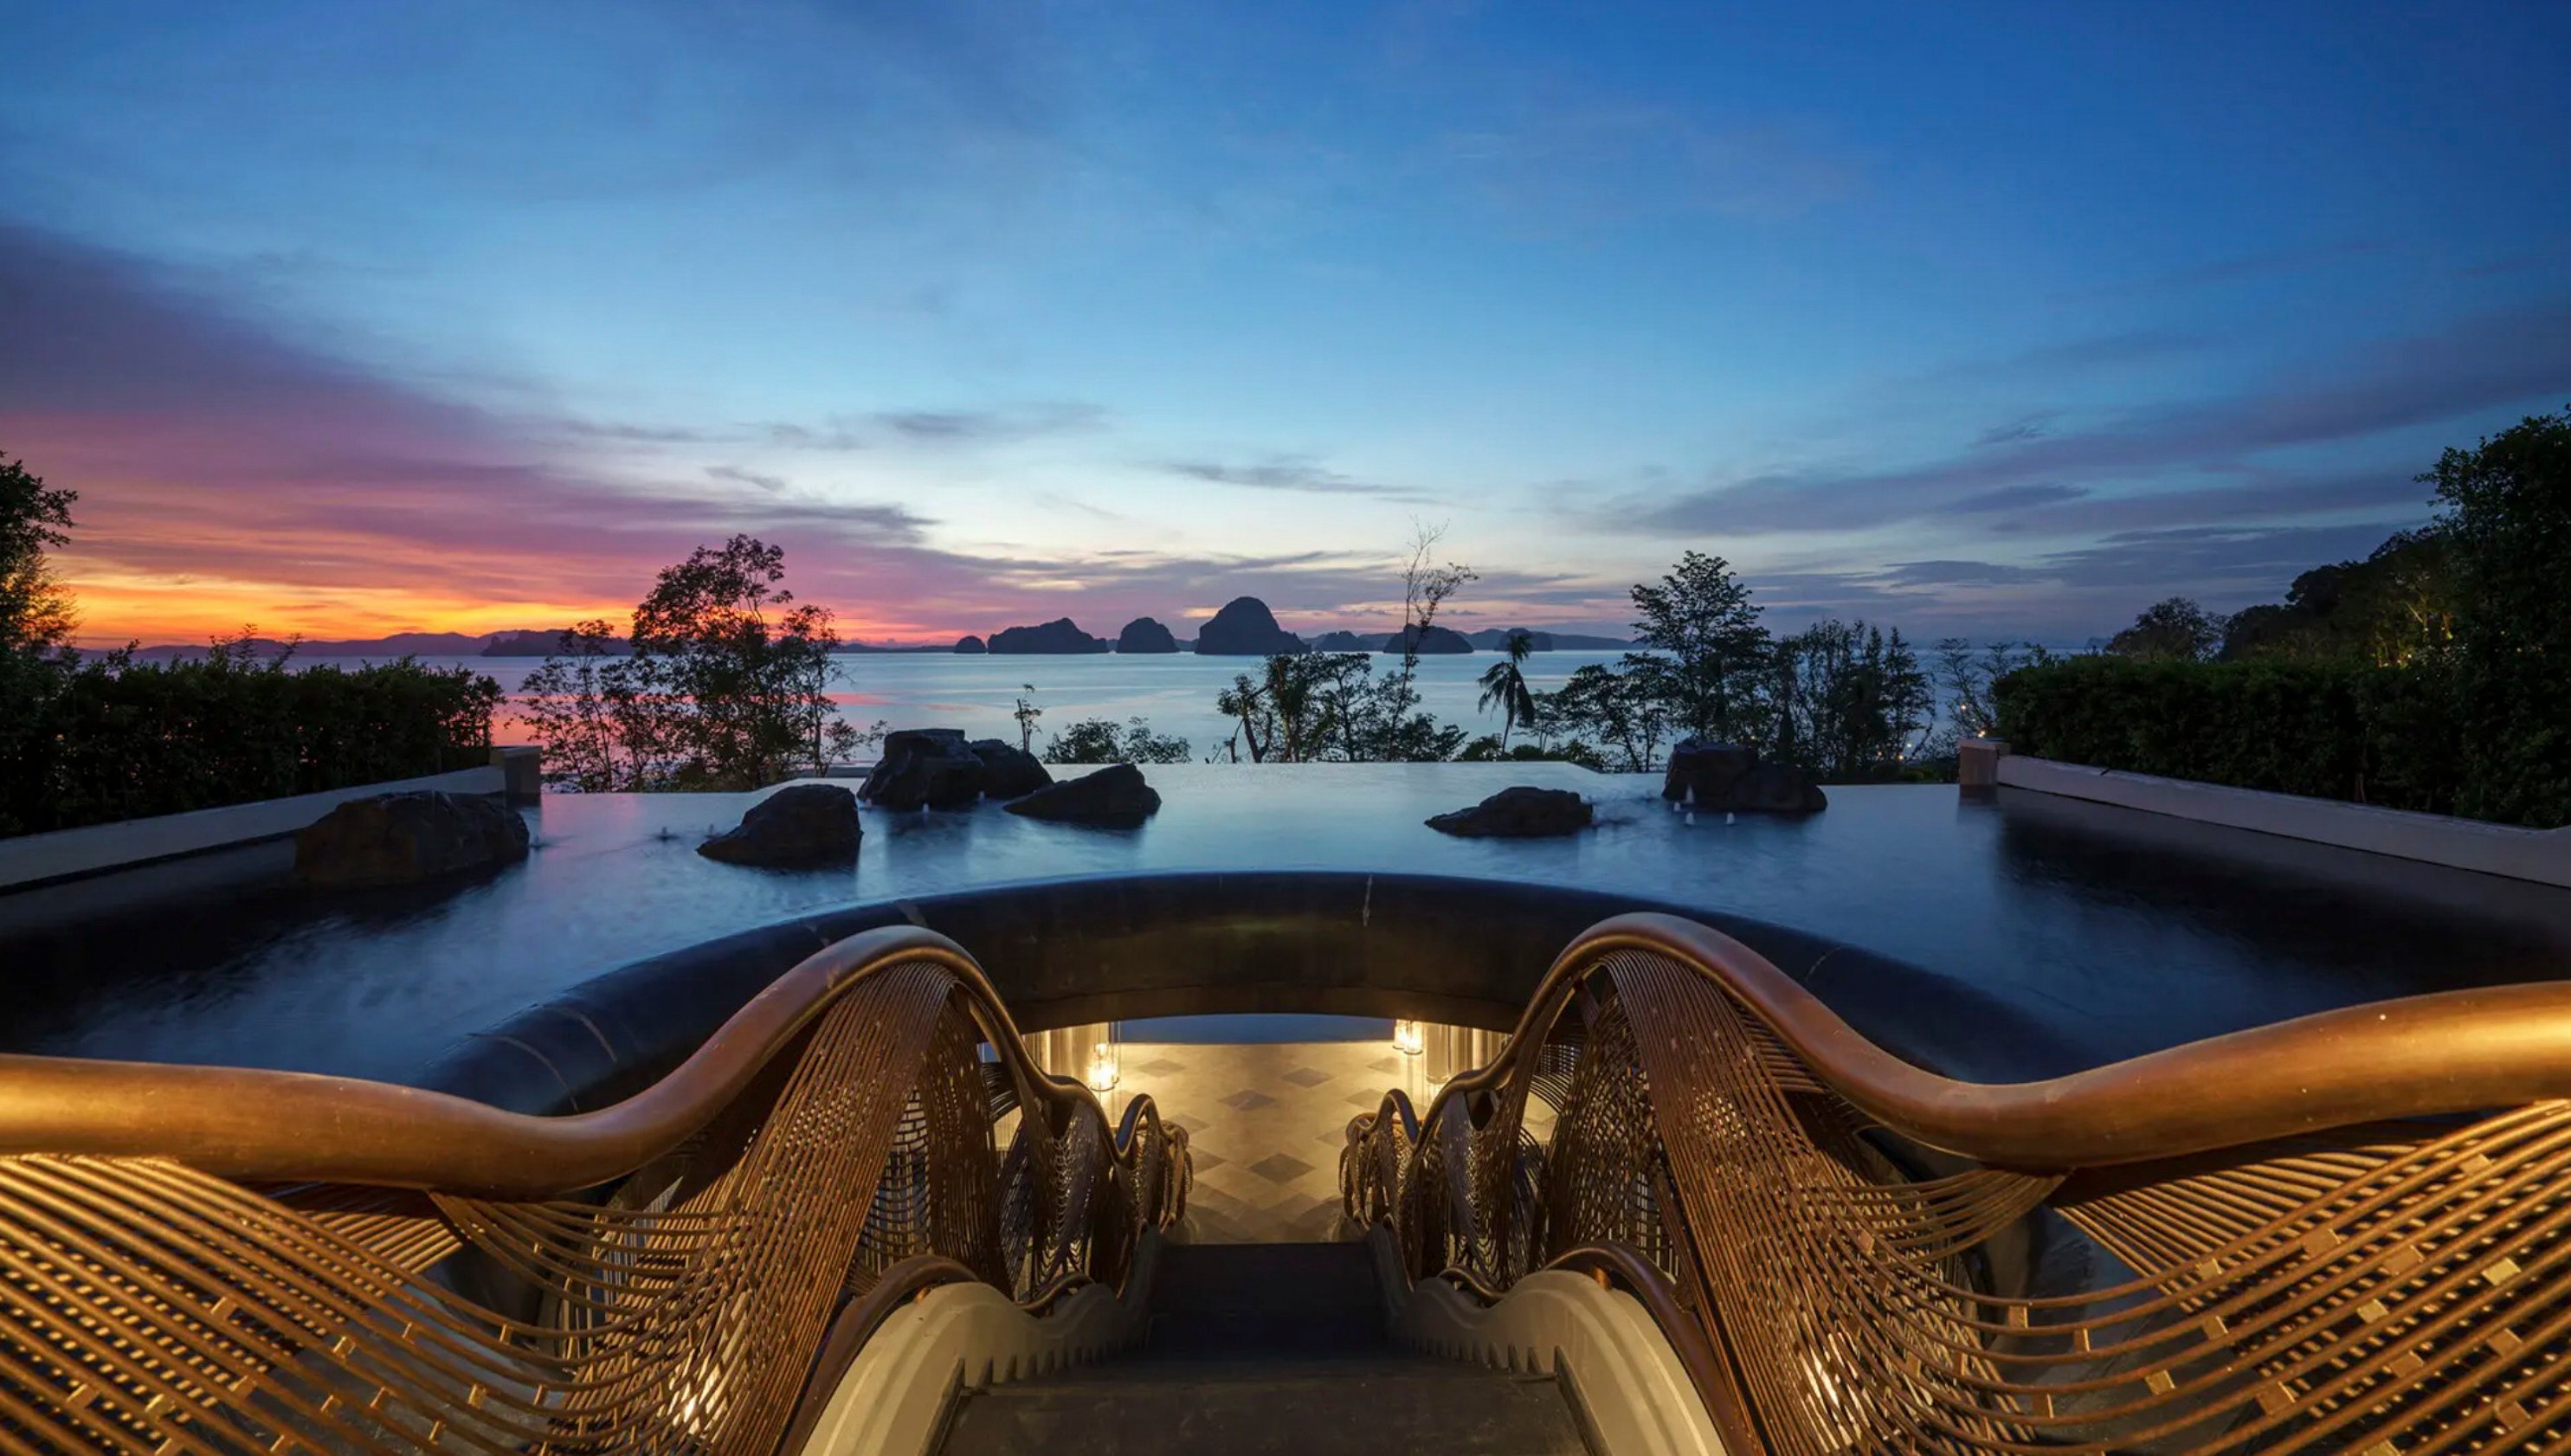 Southeast Asia is ready for tourists and a number of new resorts and boutique hotels have recently opened in the region. Above: the Banyan Tree resort in Krabi, Thailand. Photo: Banyan Tree